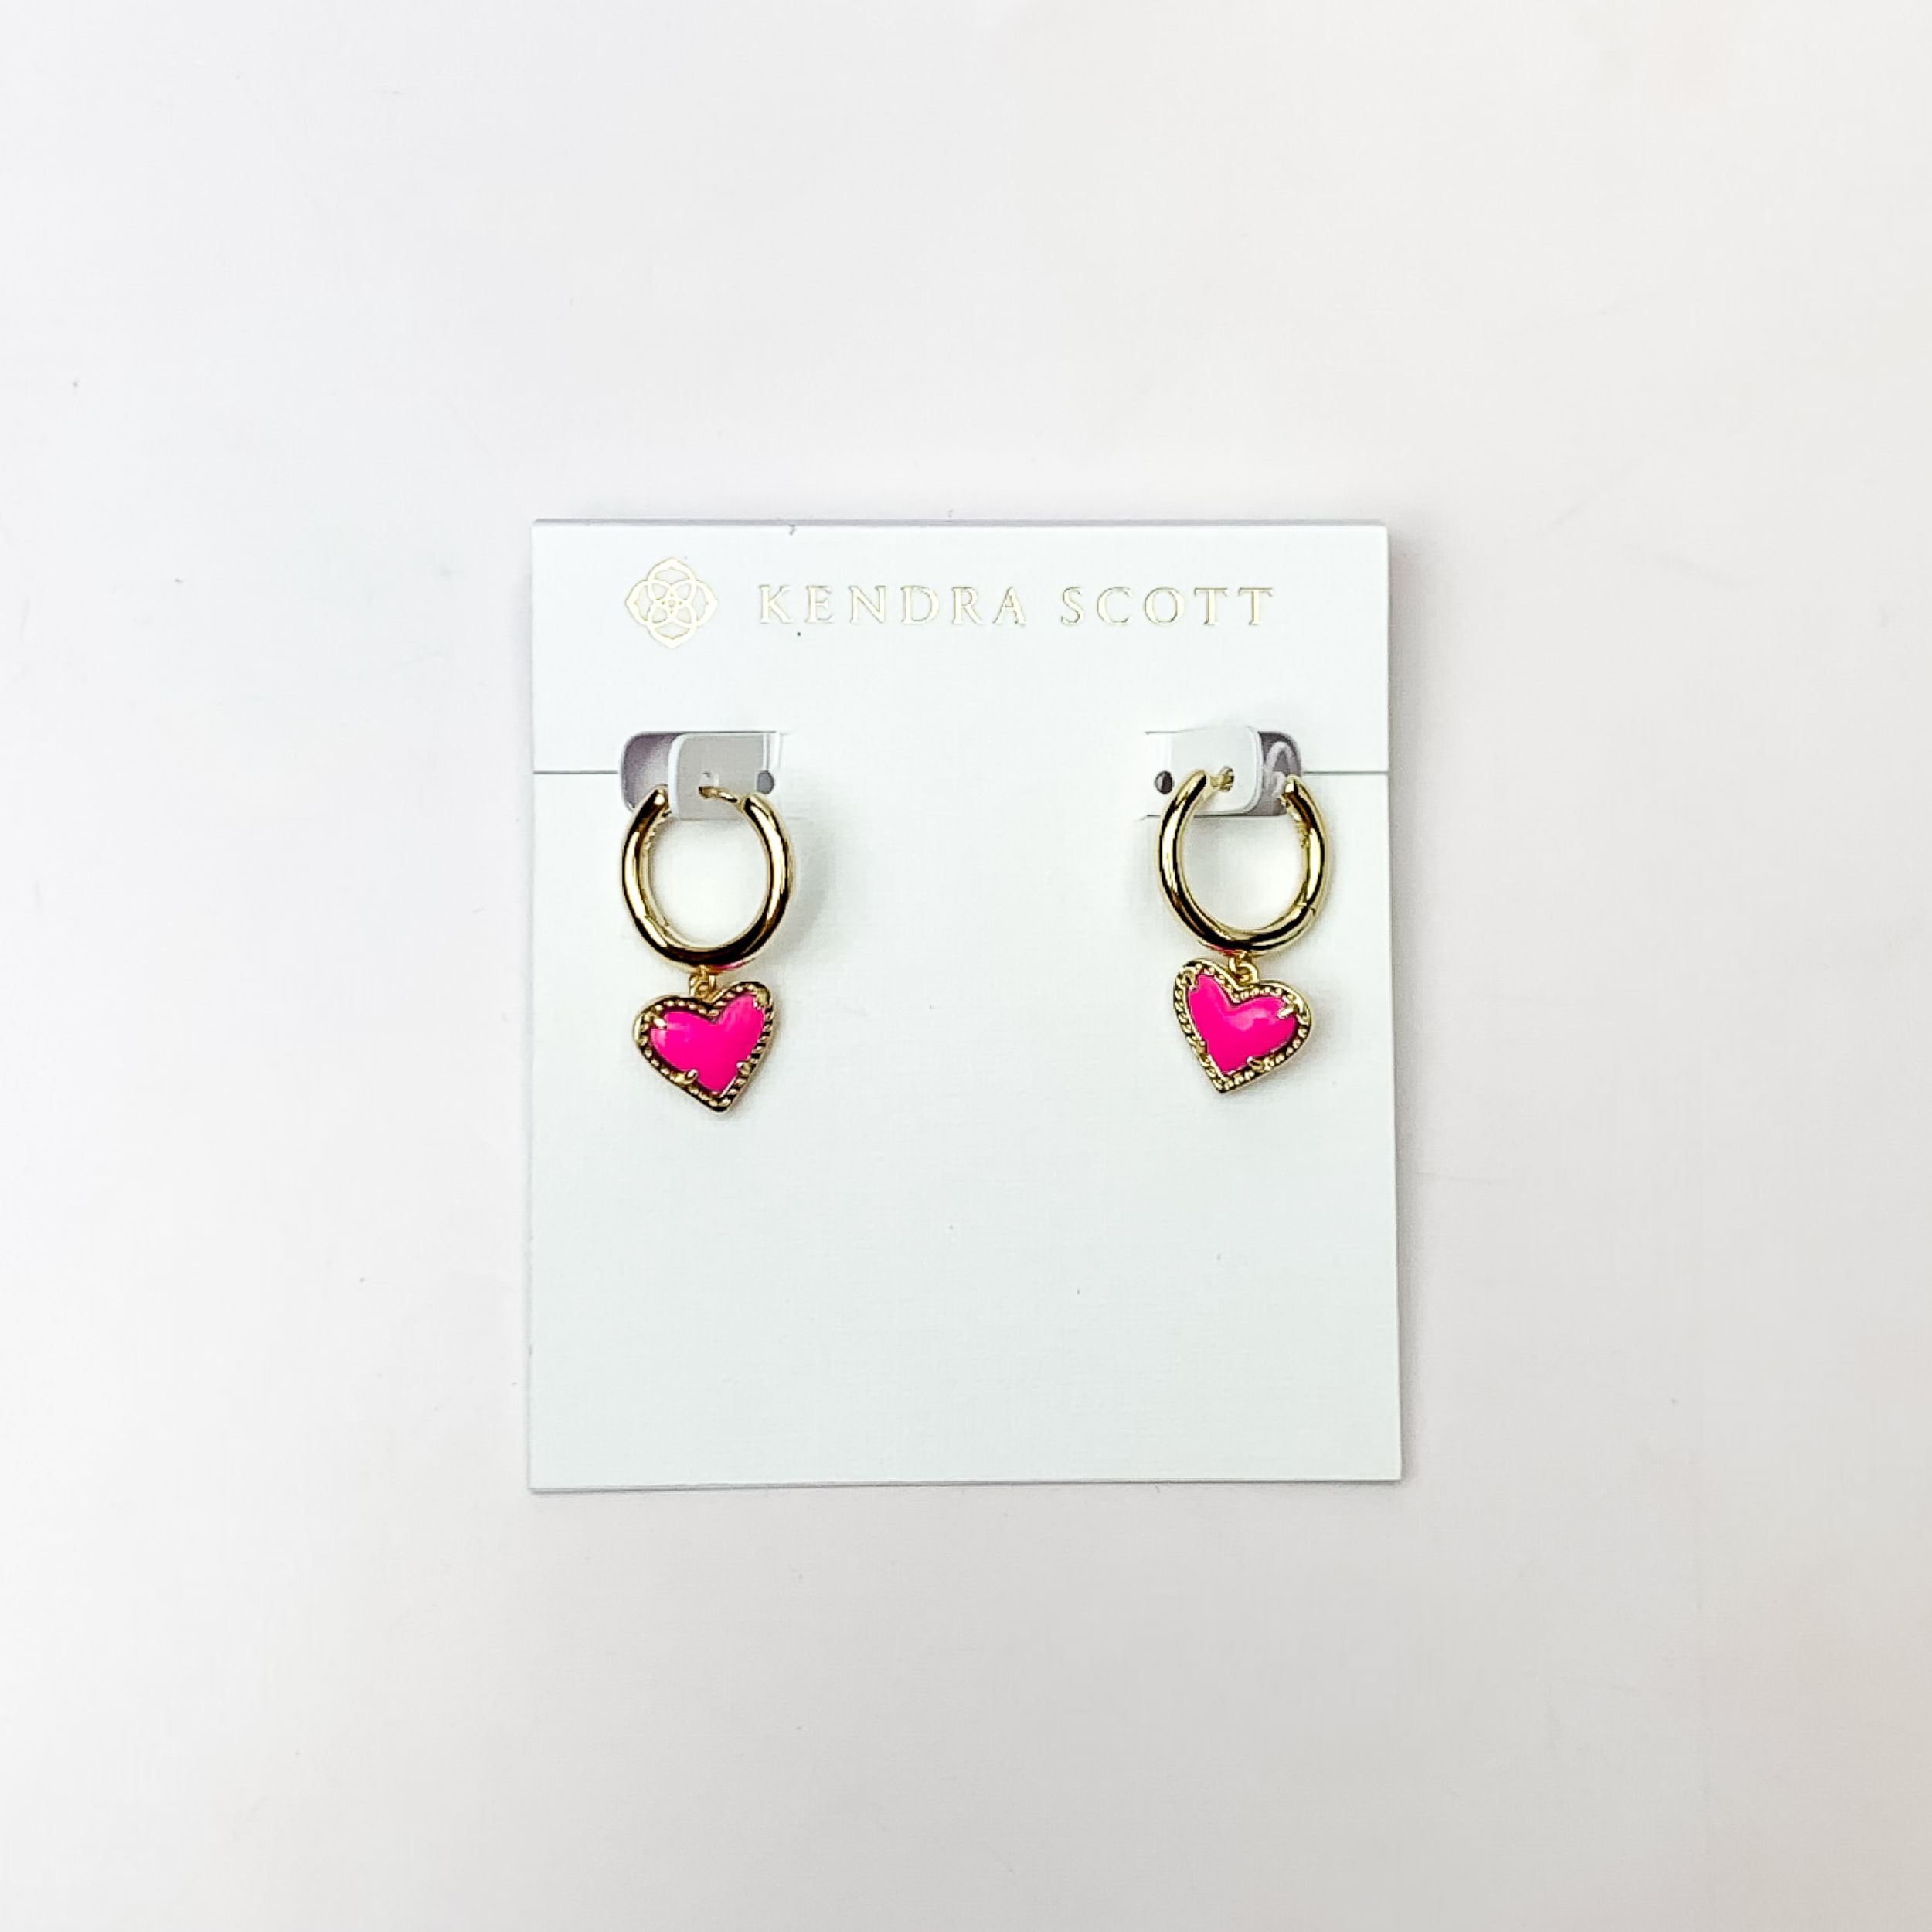 Kendra Scott | Ari Heart Gold Huggie Earrings in Magenta - Giddy Up Glamour Boutique